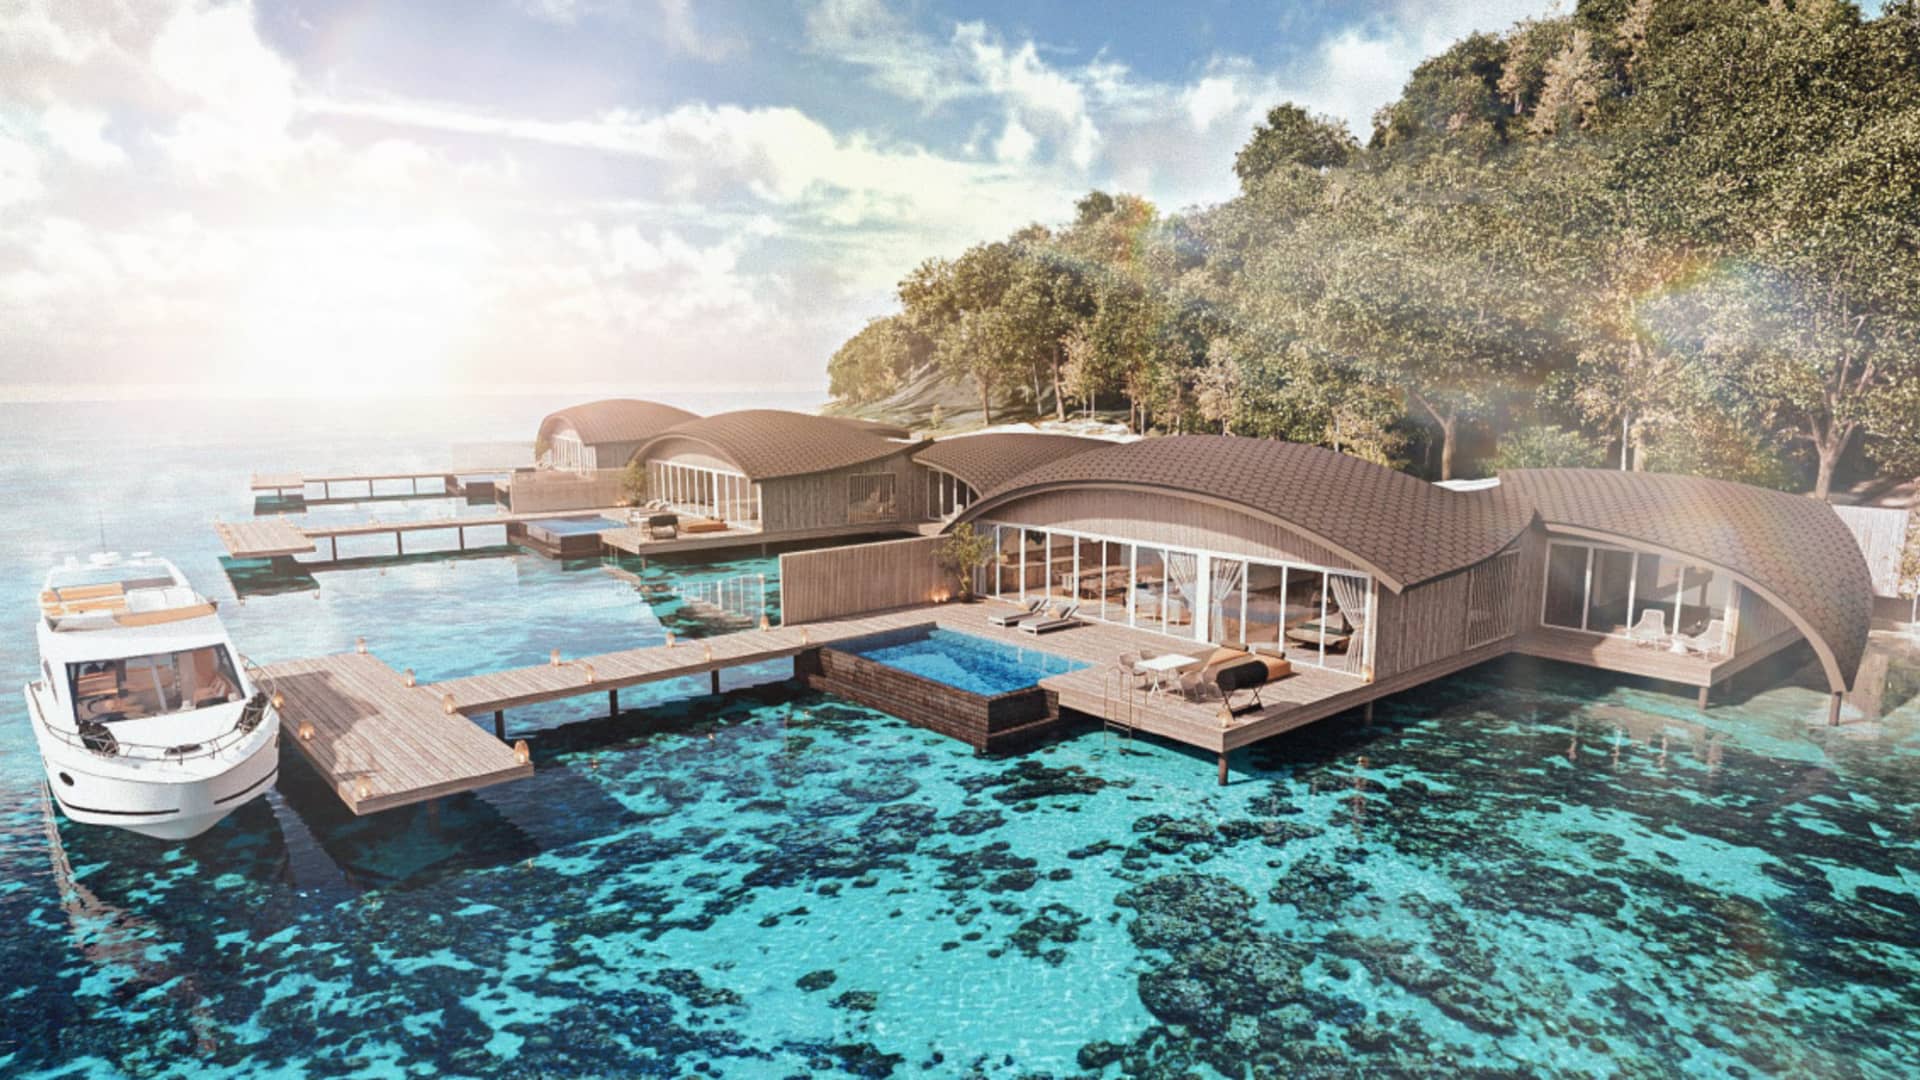 A new private island opened near Singapore and Batam